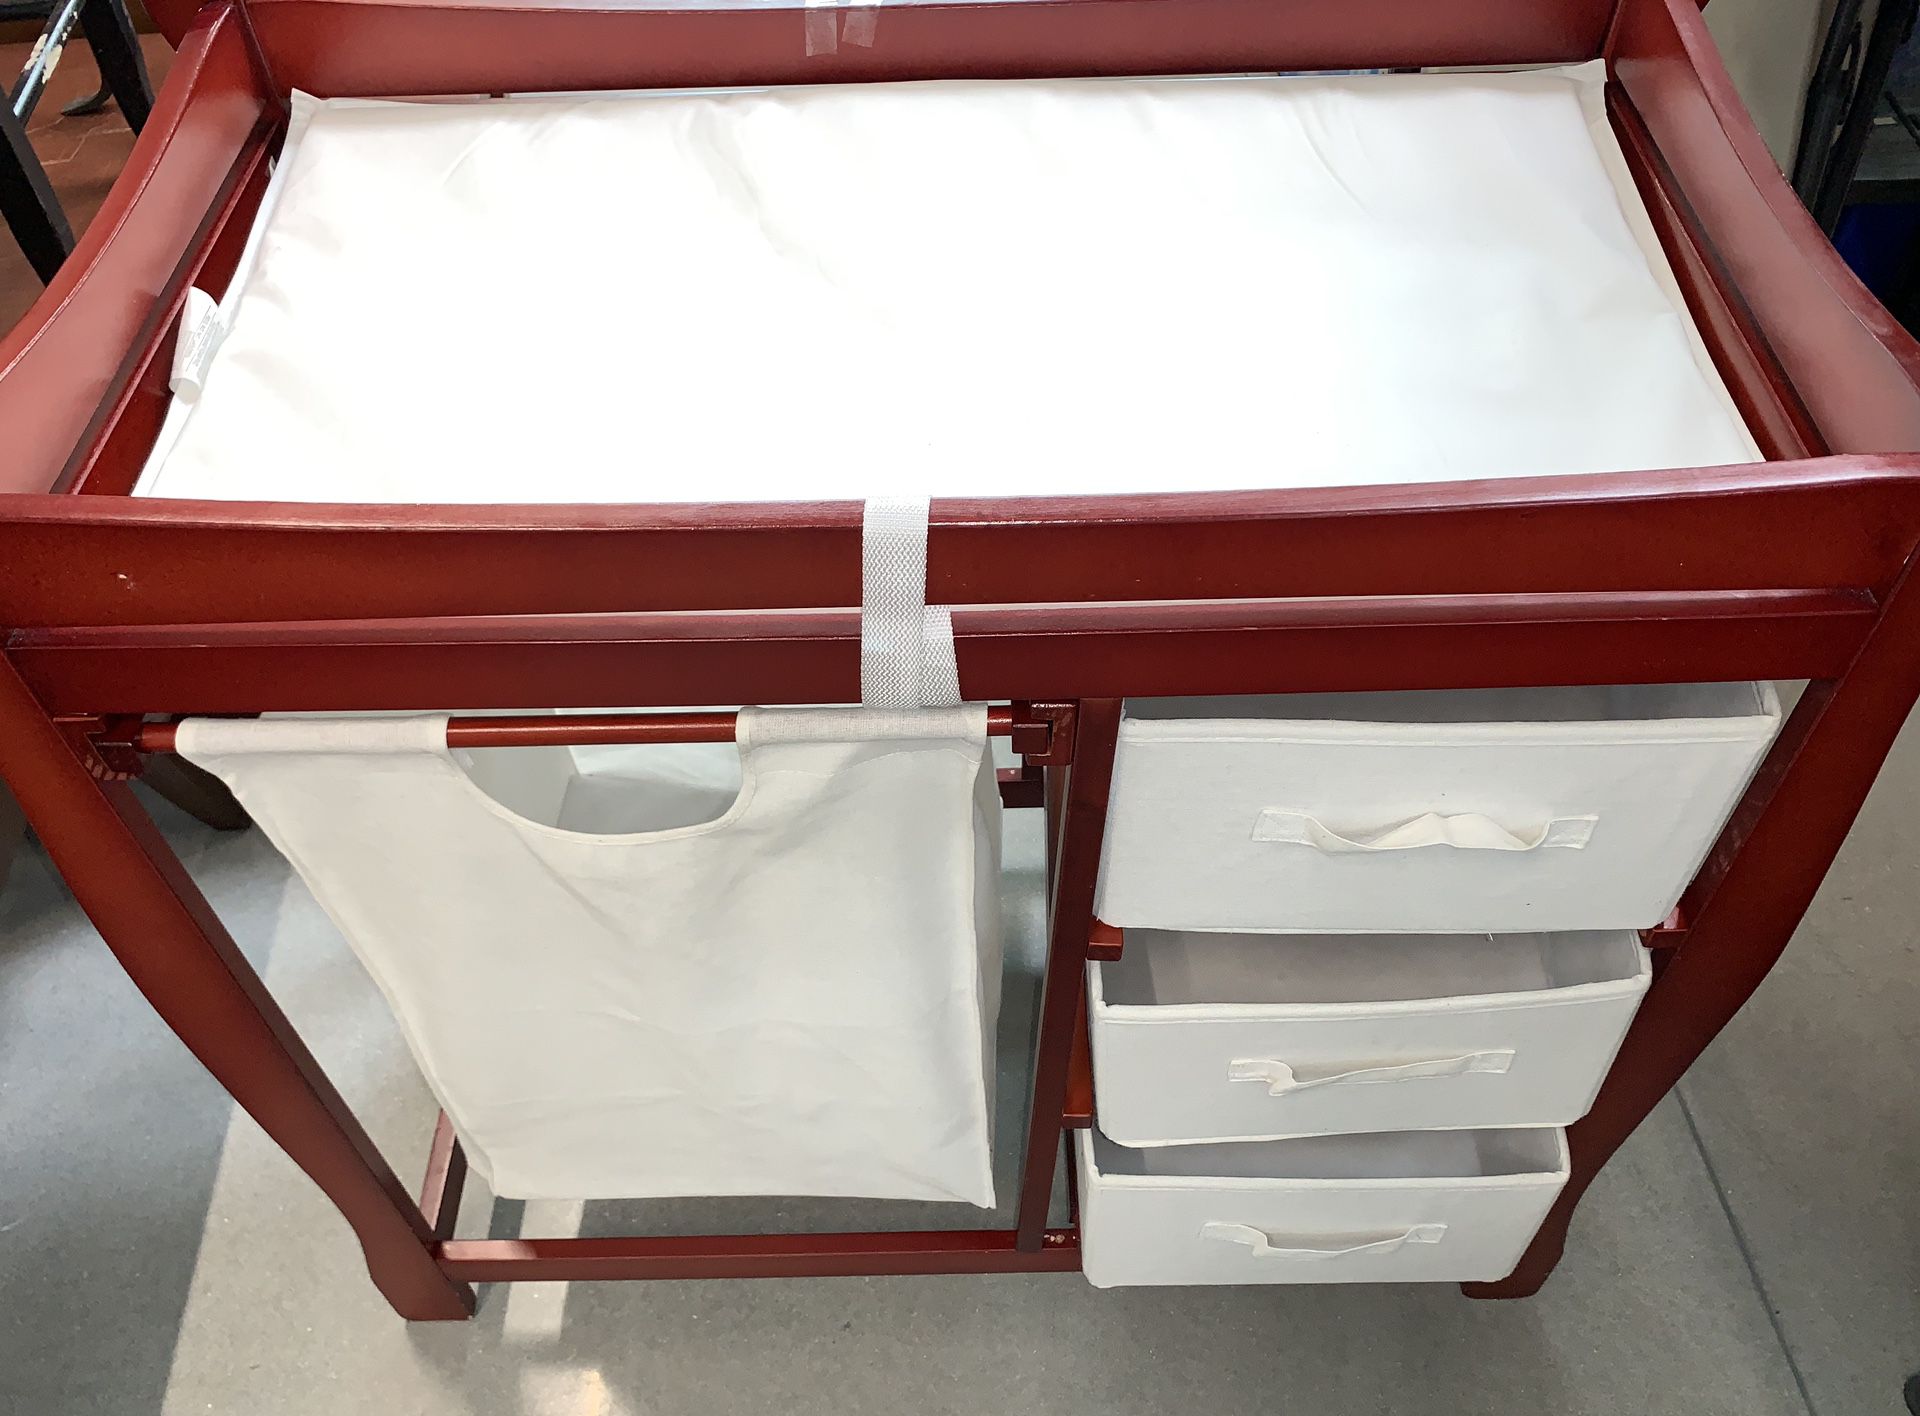 BABY CHANGING TABLE NEWBORN WITH PAD AND DRAWERS